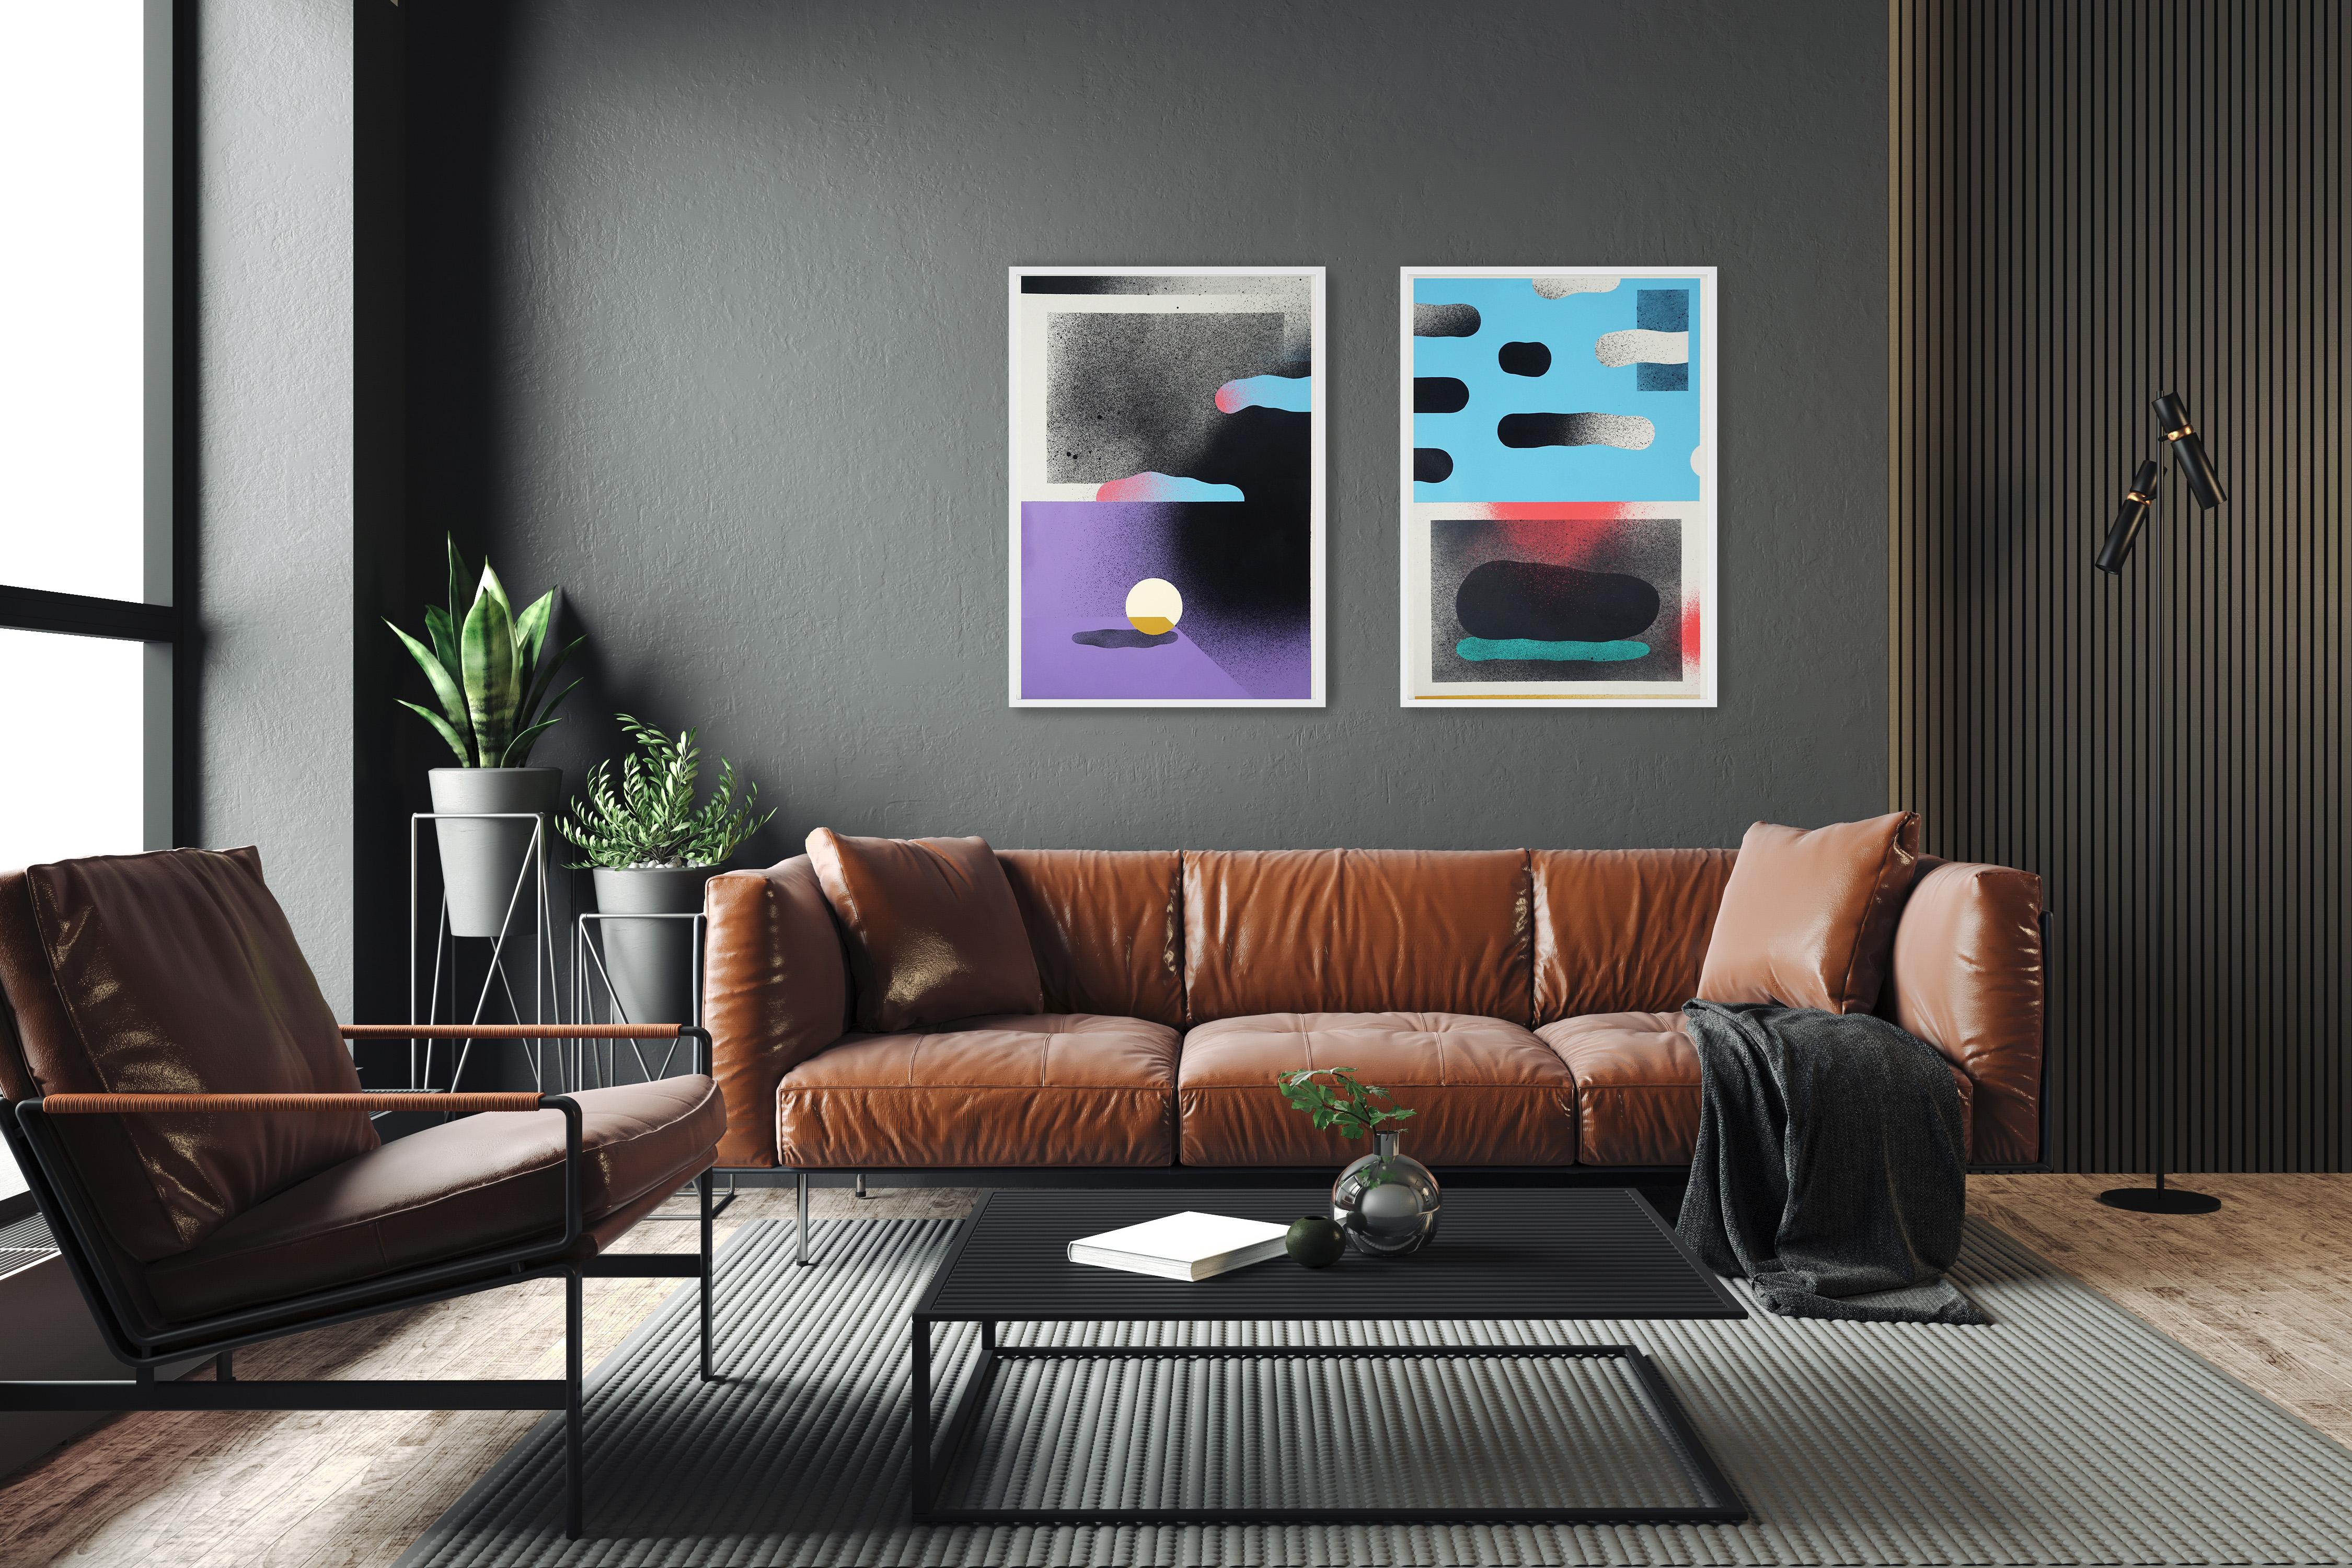 Sky Before the Storm, Dreamy Urban Landscapes Diptych, Purple, Blue, Black, Rock - Contemporary Painting by Aleix Font